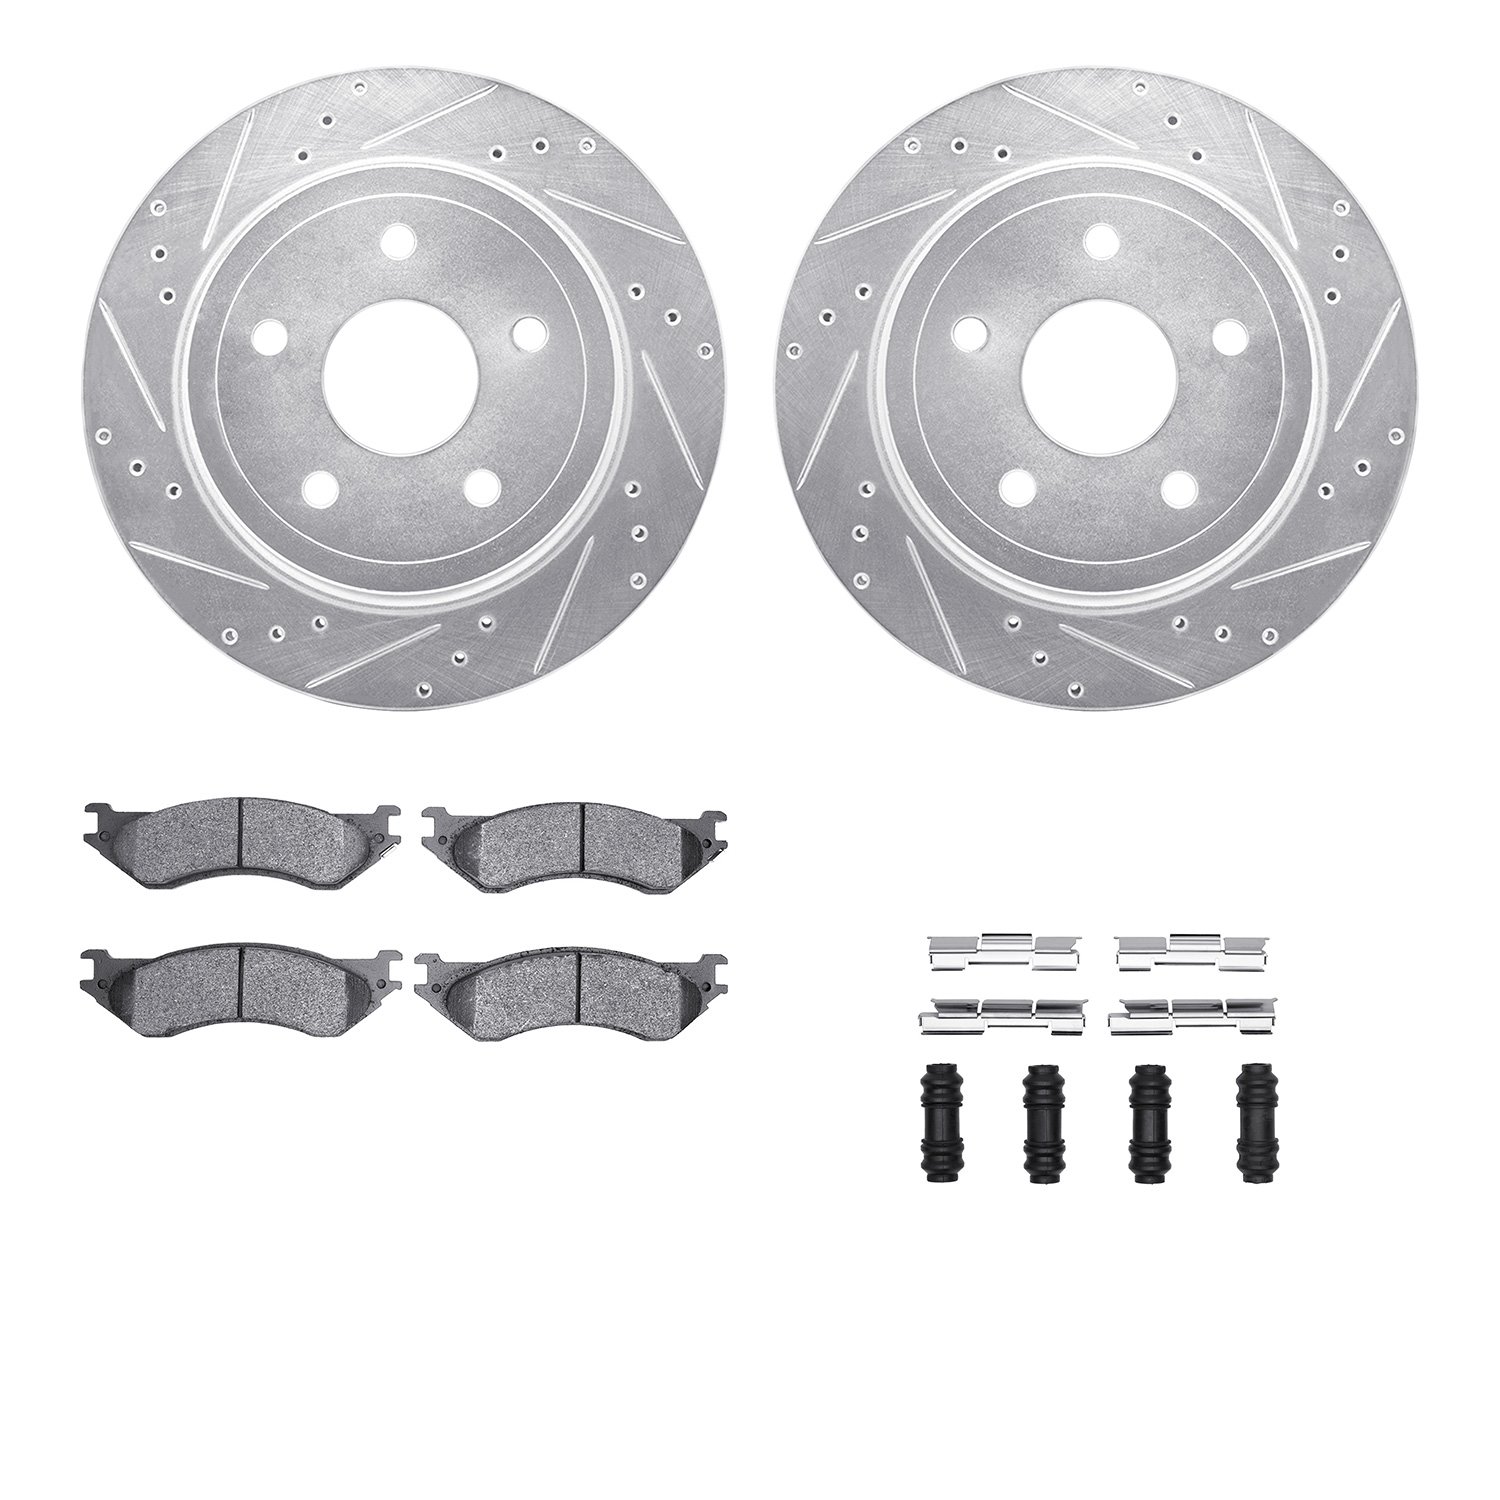 7412-40019 Drilled/Slotted Brake Rotors with Ultimate-Duty Brake Pads Kit & Hardware [Silver], 2004-2006 Mopar, Position: Rear